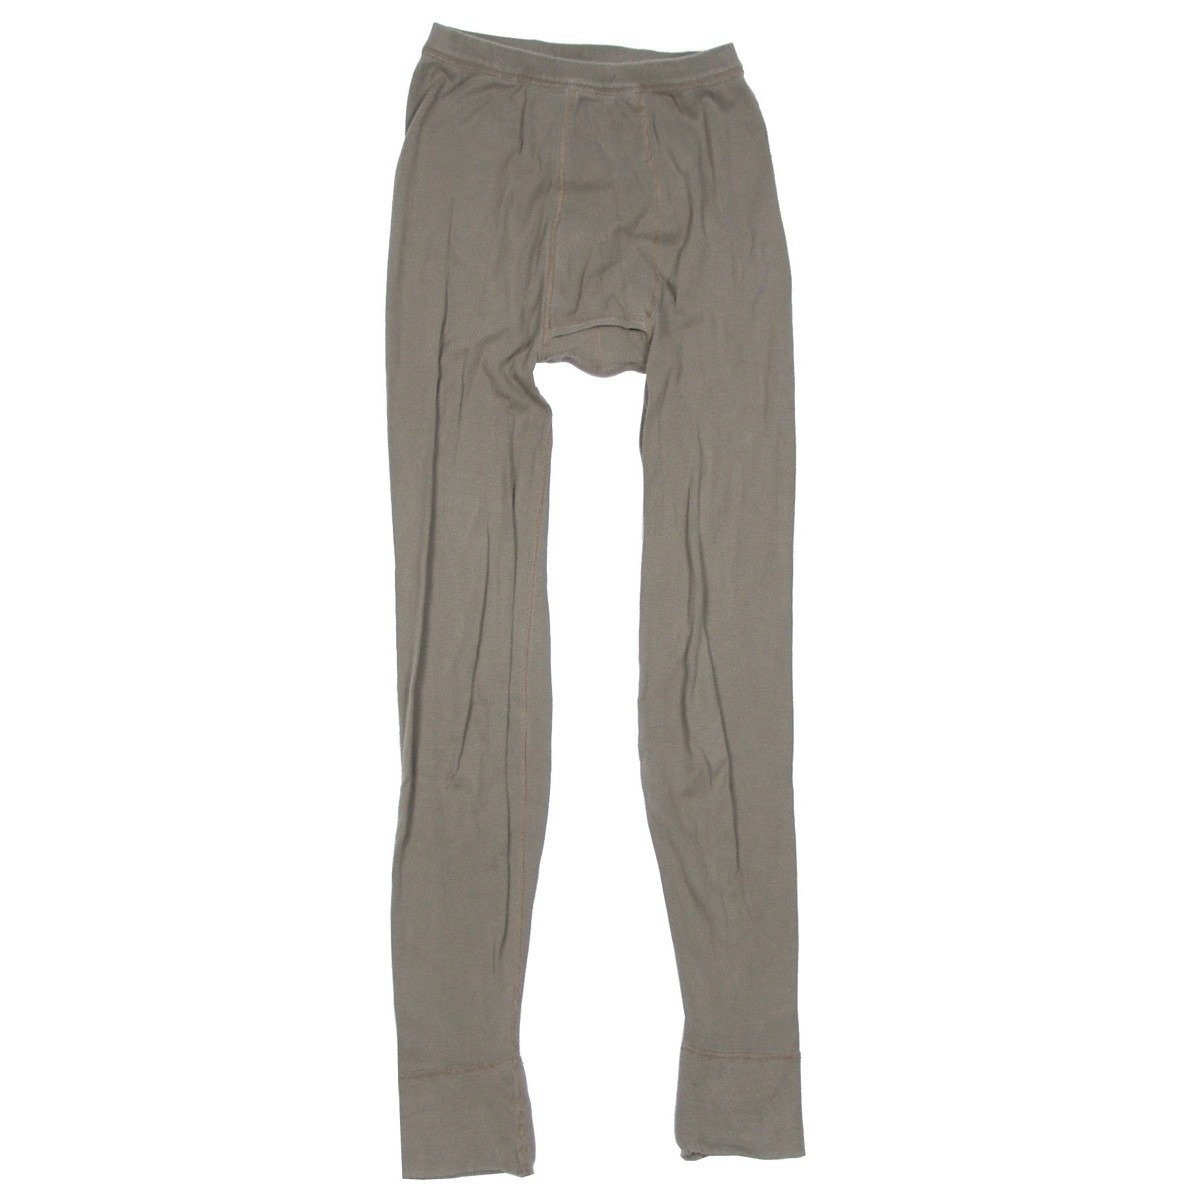 Austr. BH Underpants, OD green, used | Military Surplus \ Used Clothing ...